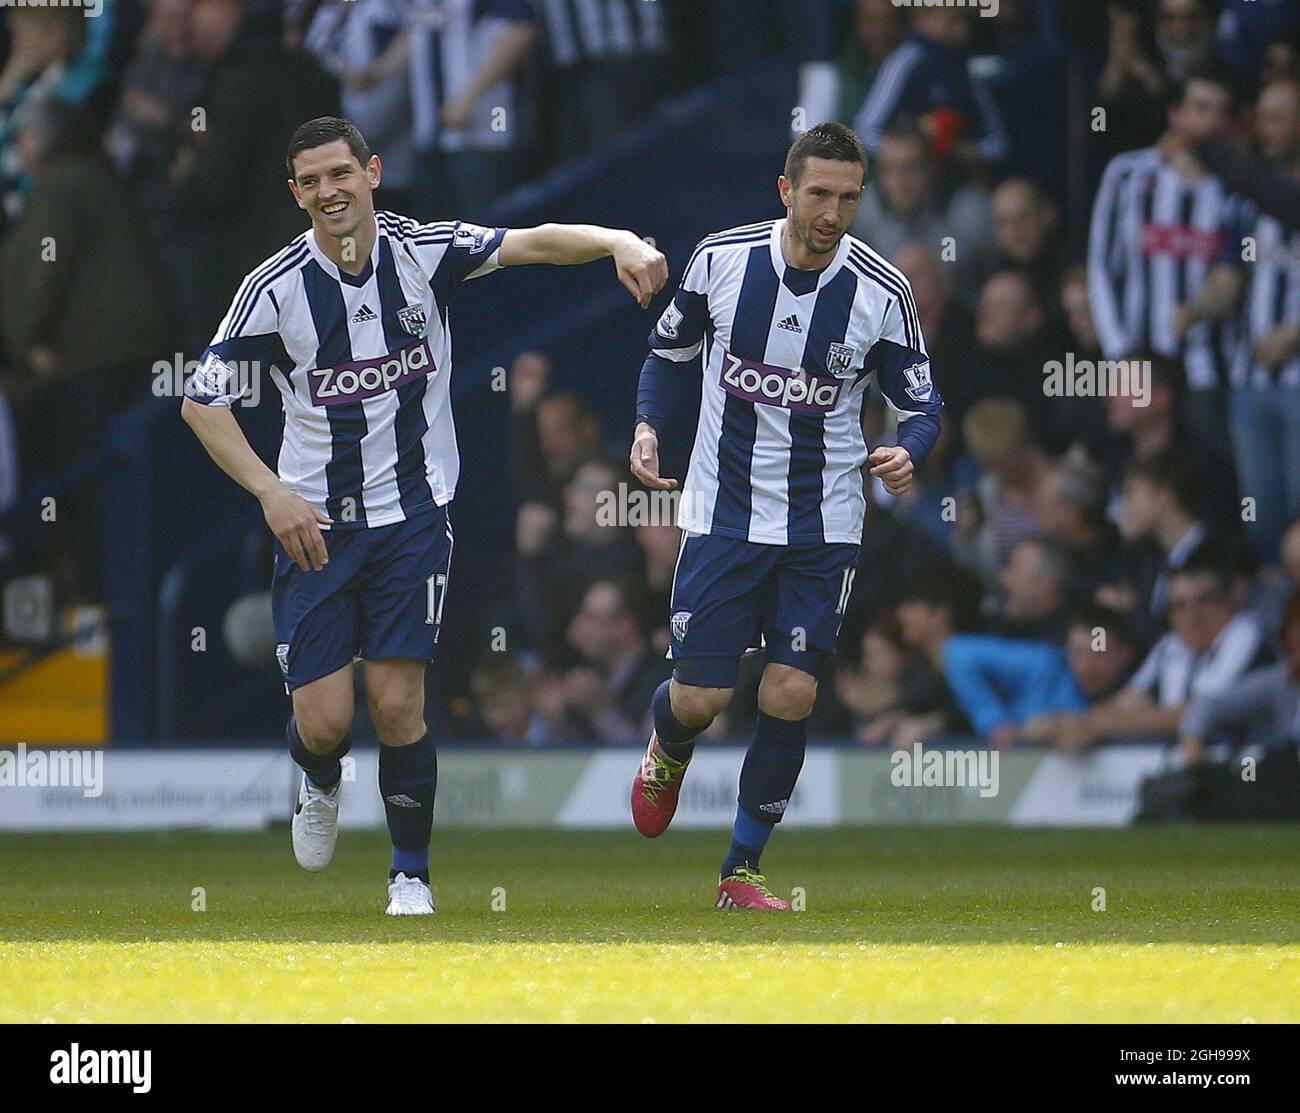 Scorers both, Graham Dorrans congratulates Morgan Amalfitano following the first goal of the game for West Bromwich Albion during the Barclays Premier League match between West Bromwich Albion and Cardiff City held at the Hawthorns in West Bromwich on March 29, 2014. Stock Photo